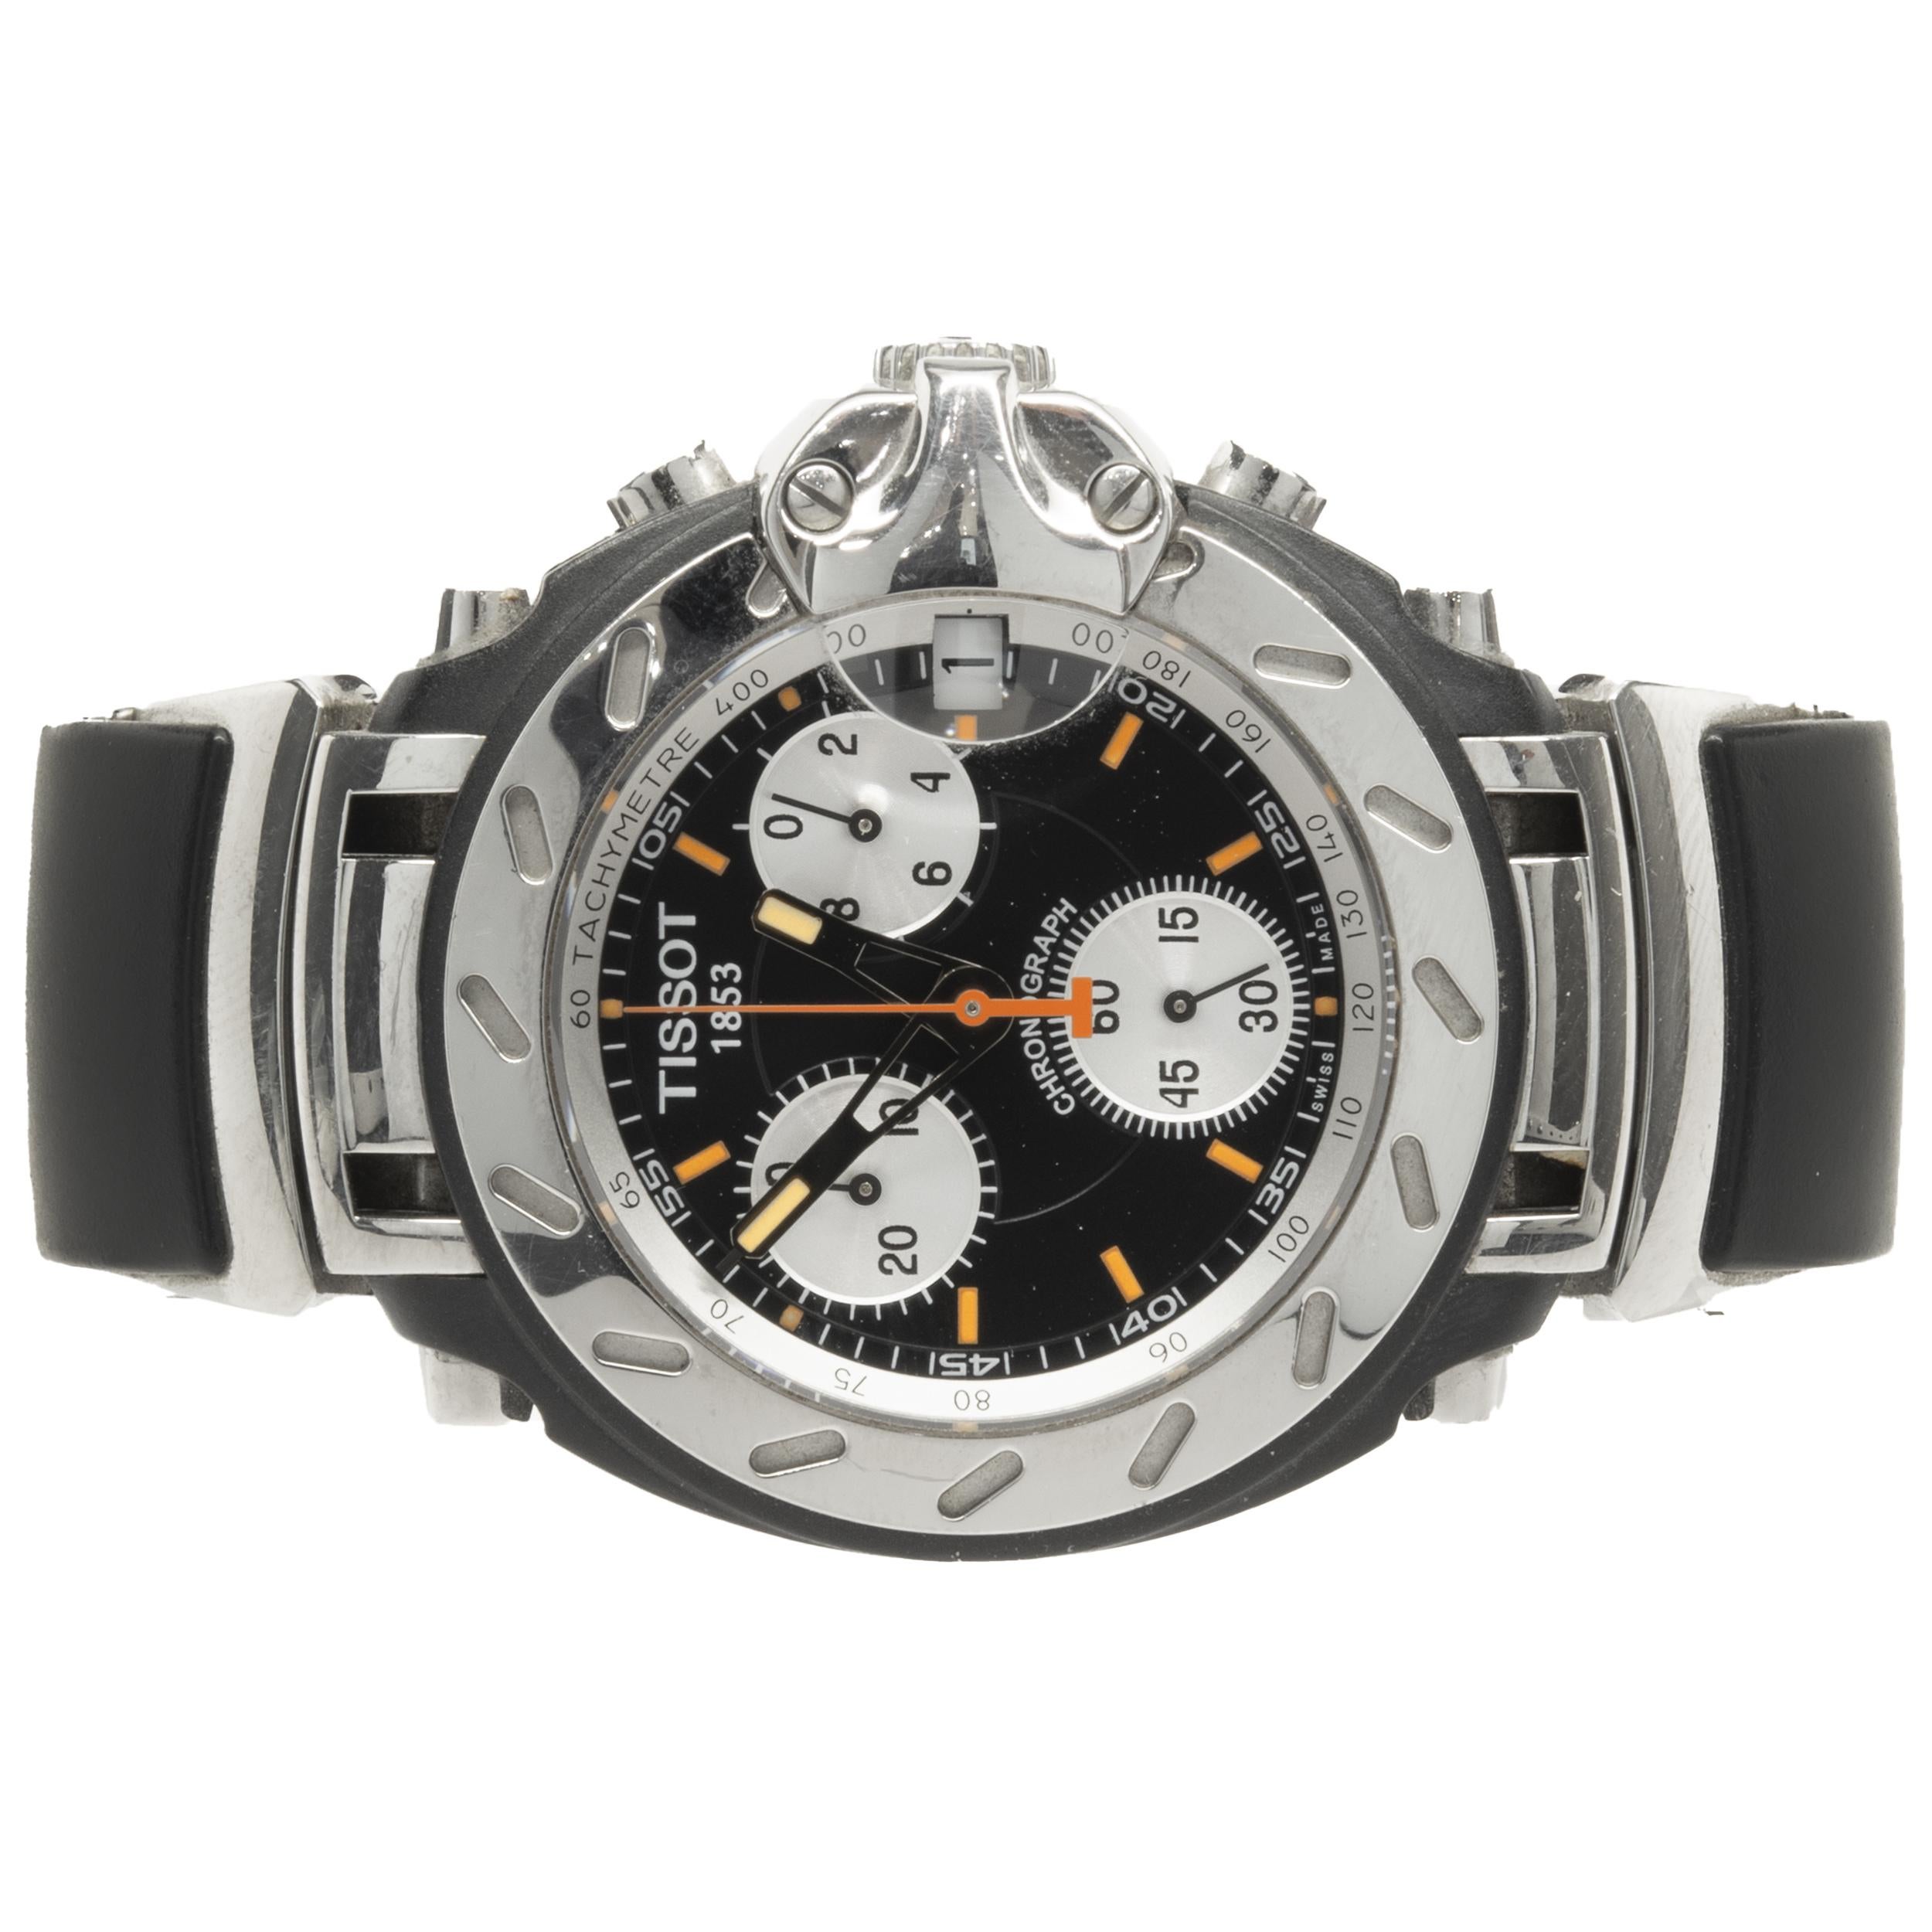 Movement: quartz
Function: hours, minutes, seconds, date, chronograph
Case: round 45mm stainless steel, sapphire crystal
Bracelet: black Tissot rubber strap with deployment clasp
Dial: black chronograph dial, orange sticks/hands
Reference #